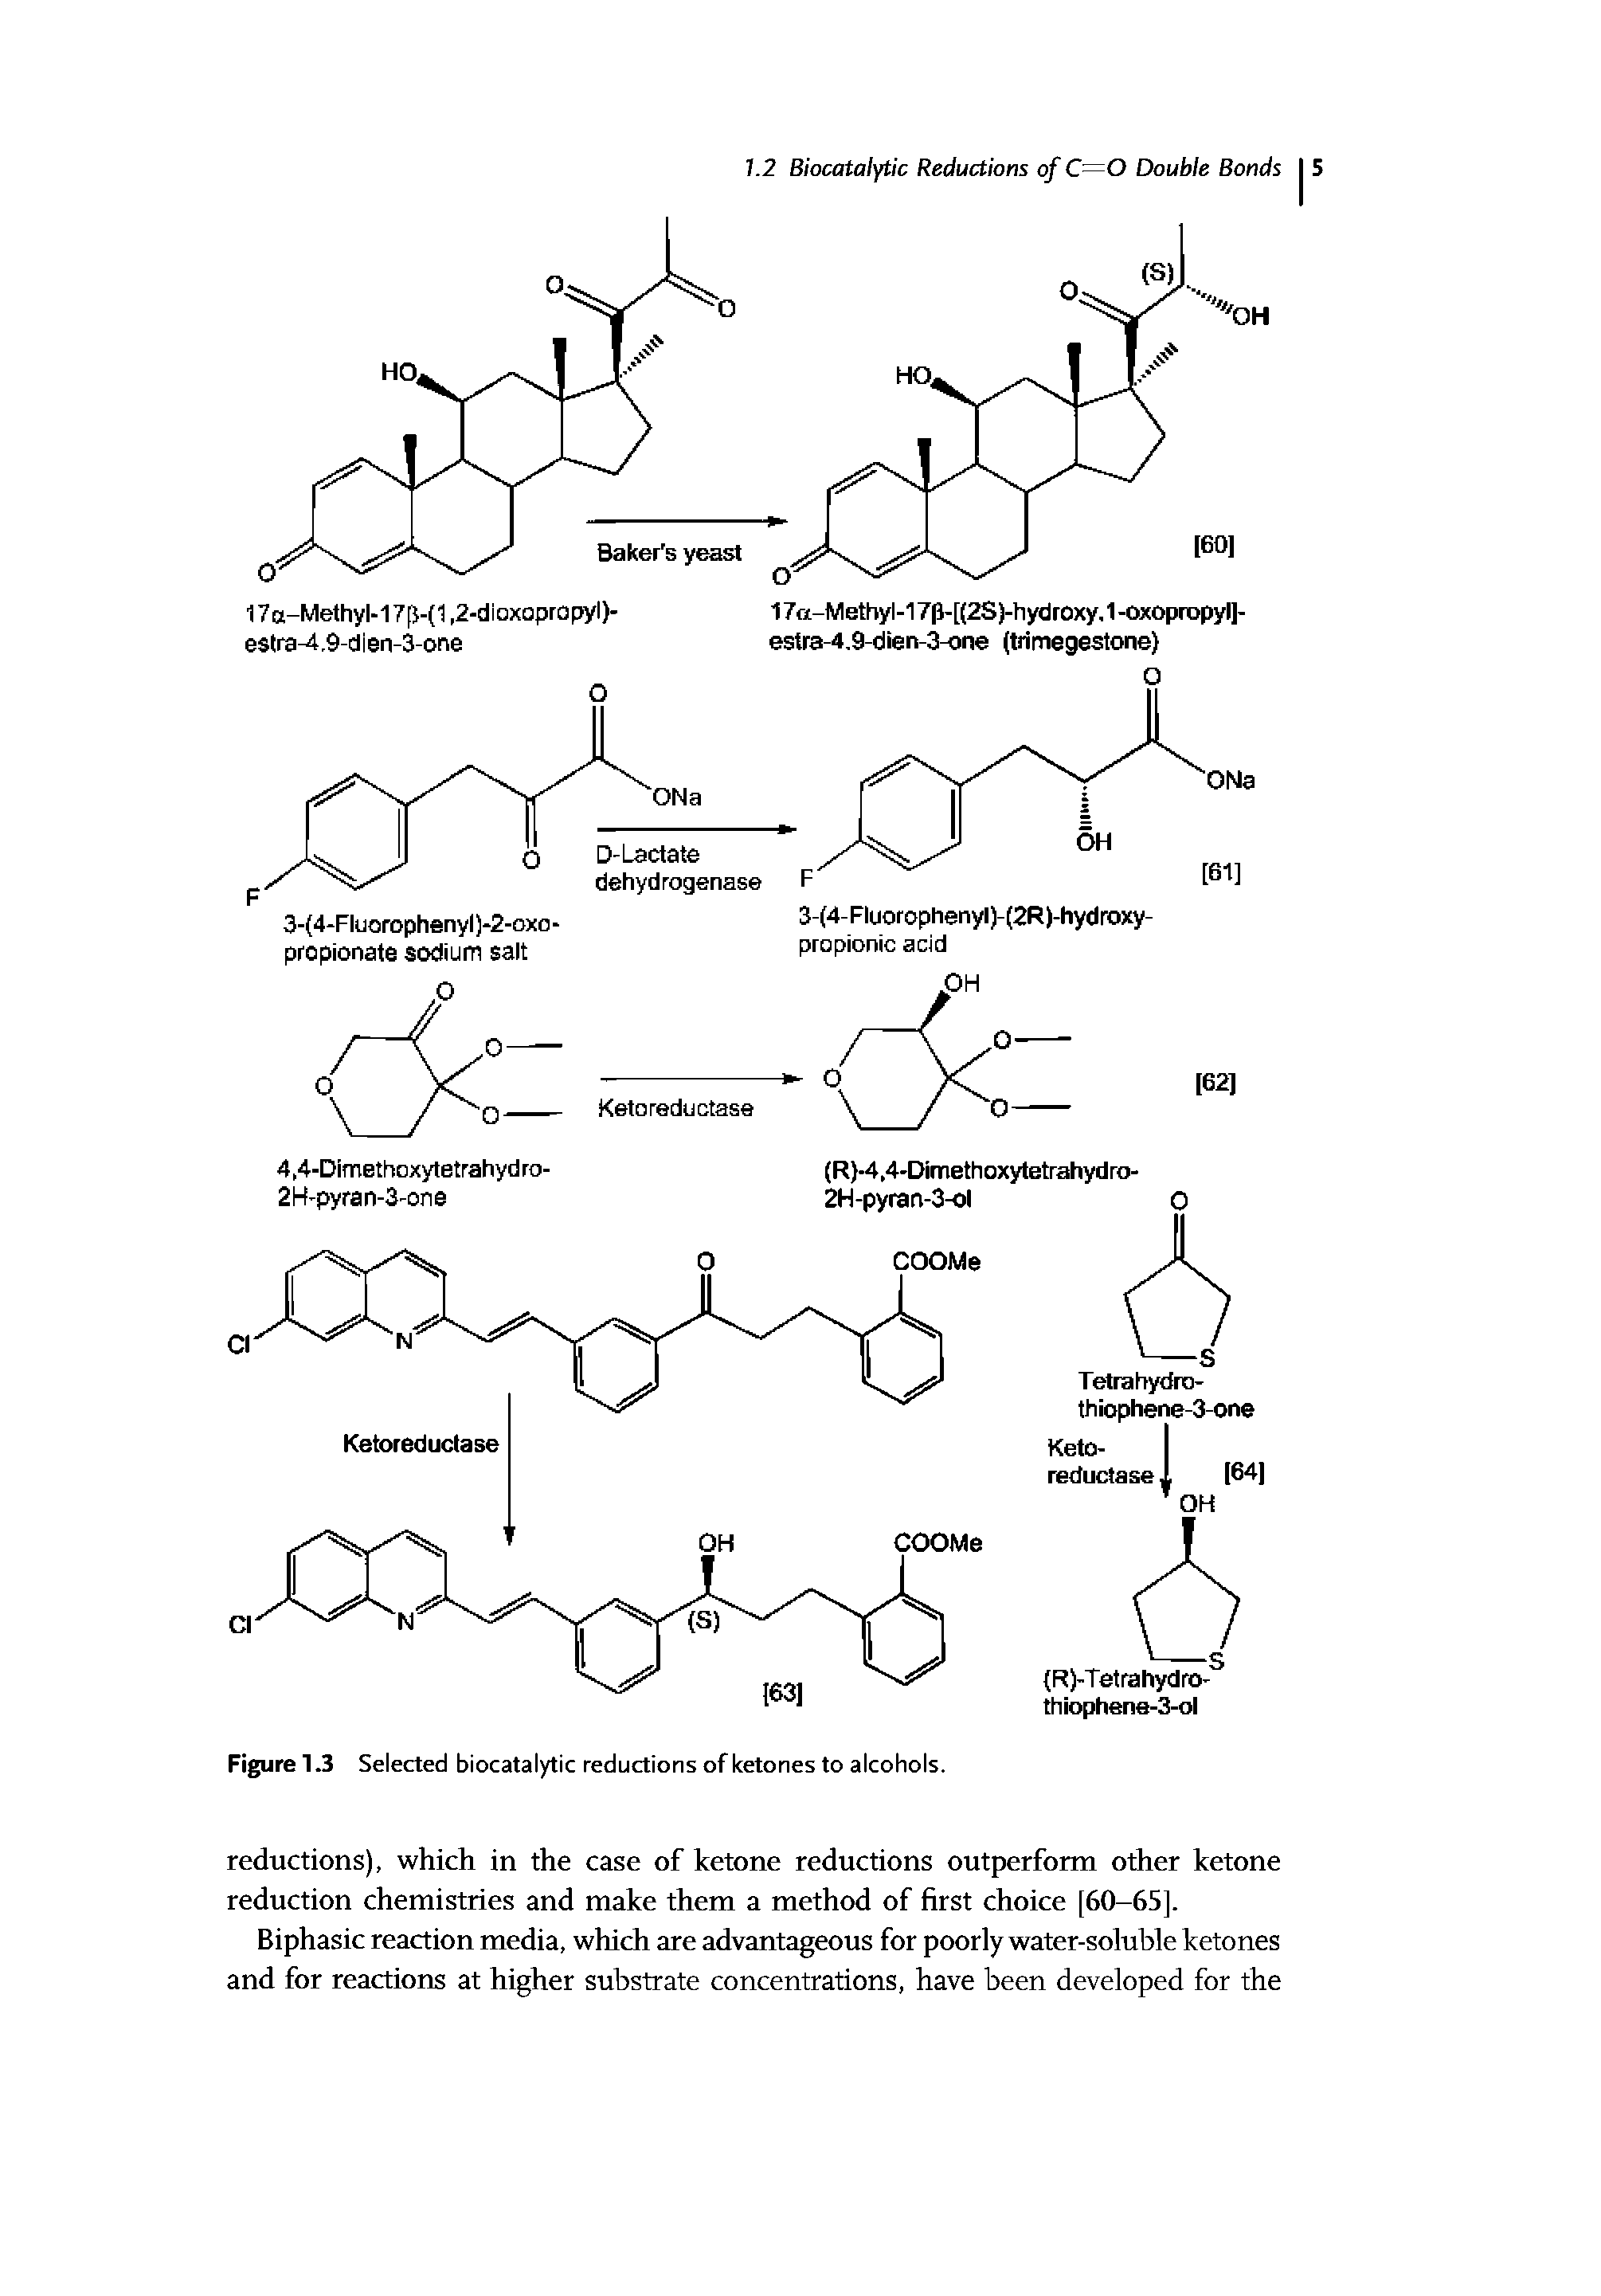 Figure 1.3 Selected biocatalytic reductions of ketones to alcohols.